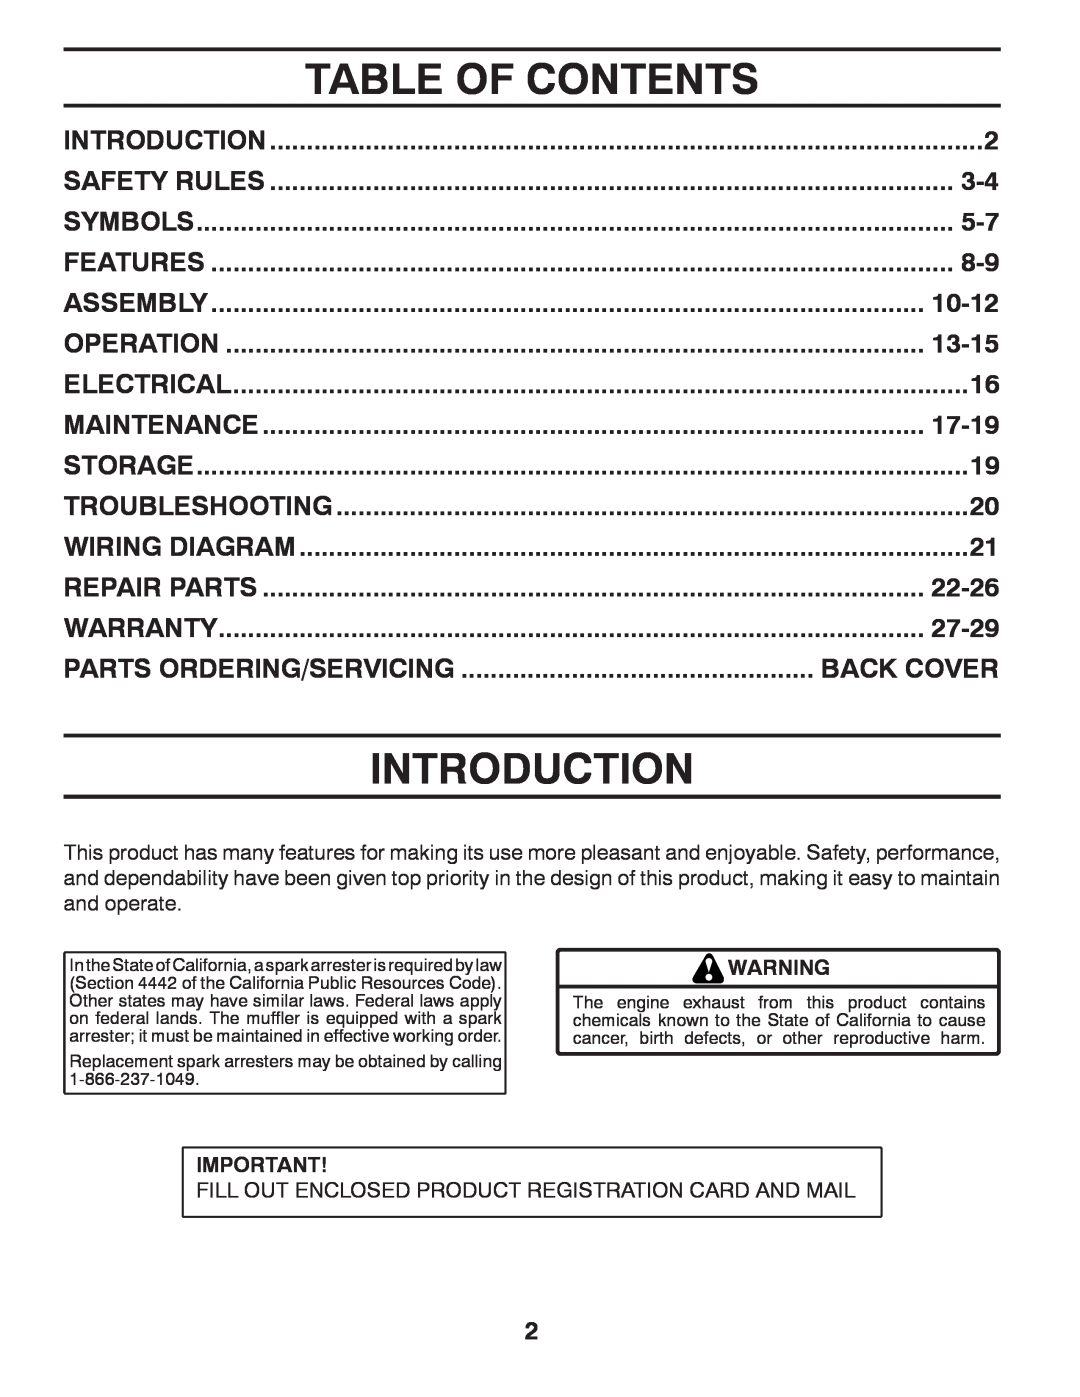 Poulan 420077 Table Of Contents, Introduction, Parts Ordering/Servicing, 10-12, 13-15, 17-19, 22-26, 27-29, Back Cover 